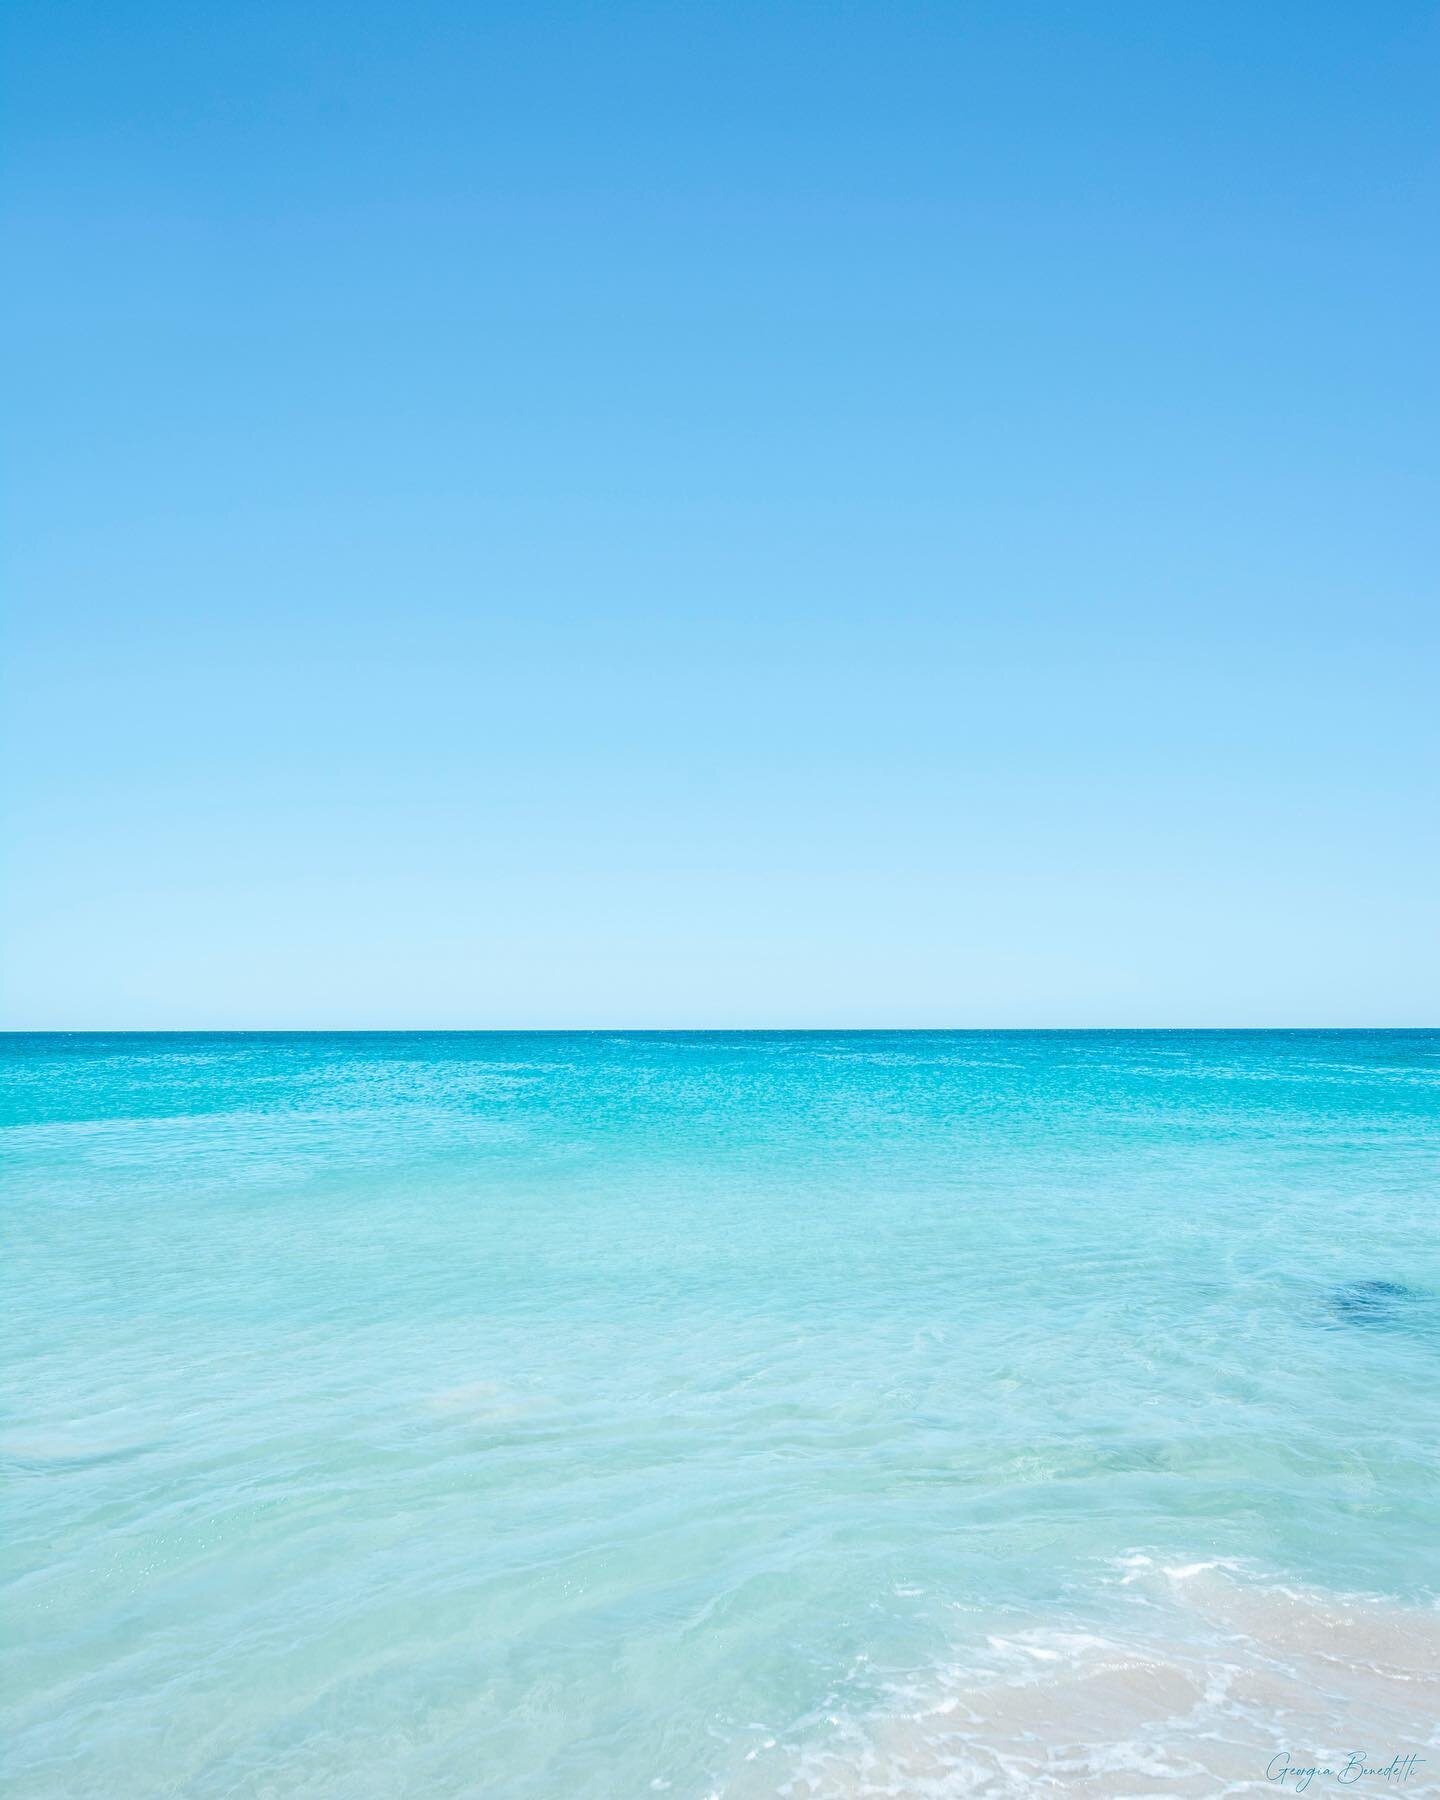 Bliss 💙 the photo most of you voted for on our story today! So here it is 😋

A very calm, very blue Perth day (quite the opposite of today) 🌧💨

This photo is a little cropped so if you would like to see the whole photo, head to our website - link